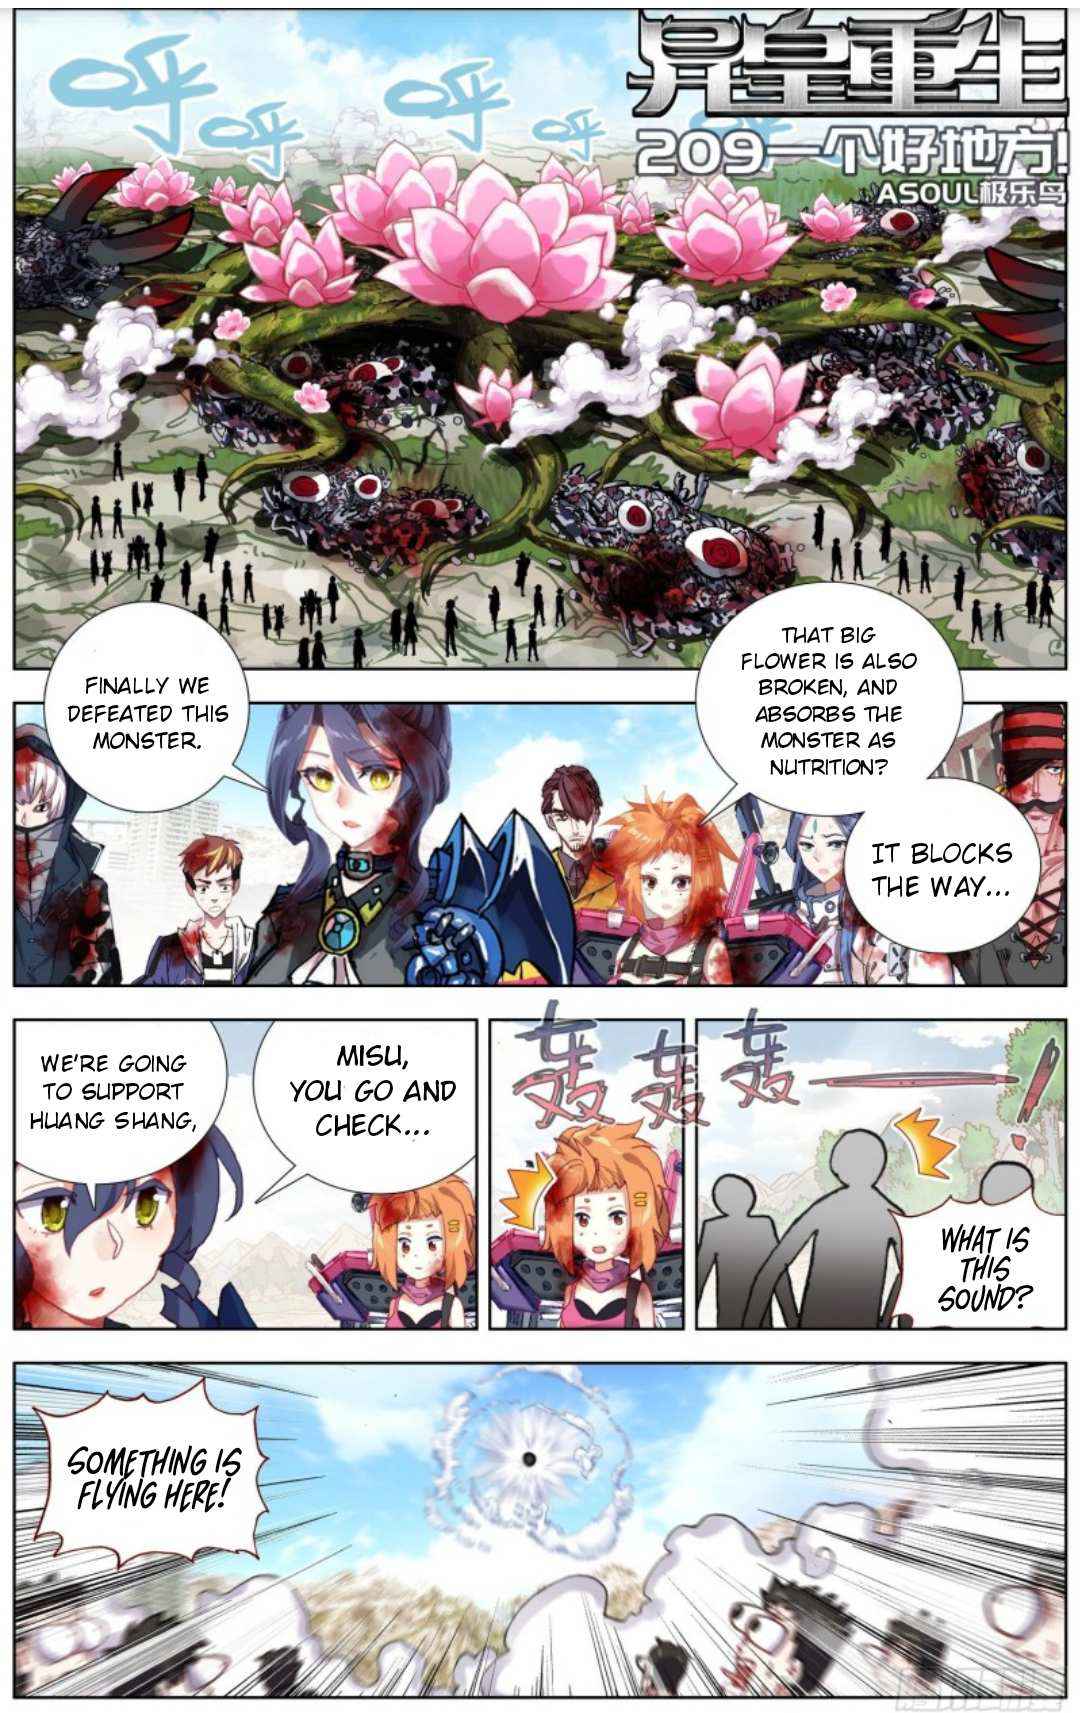 Different Kings,  Chapter 209-fix image 02